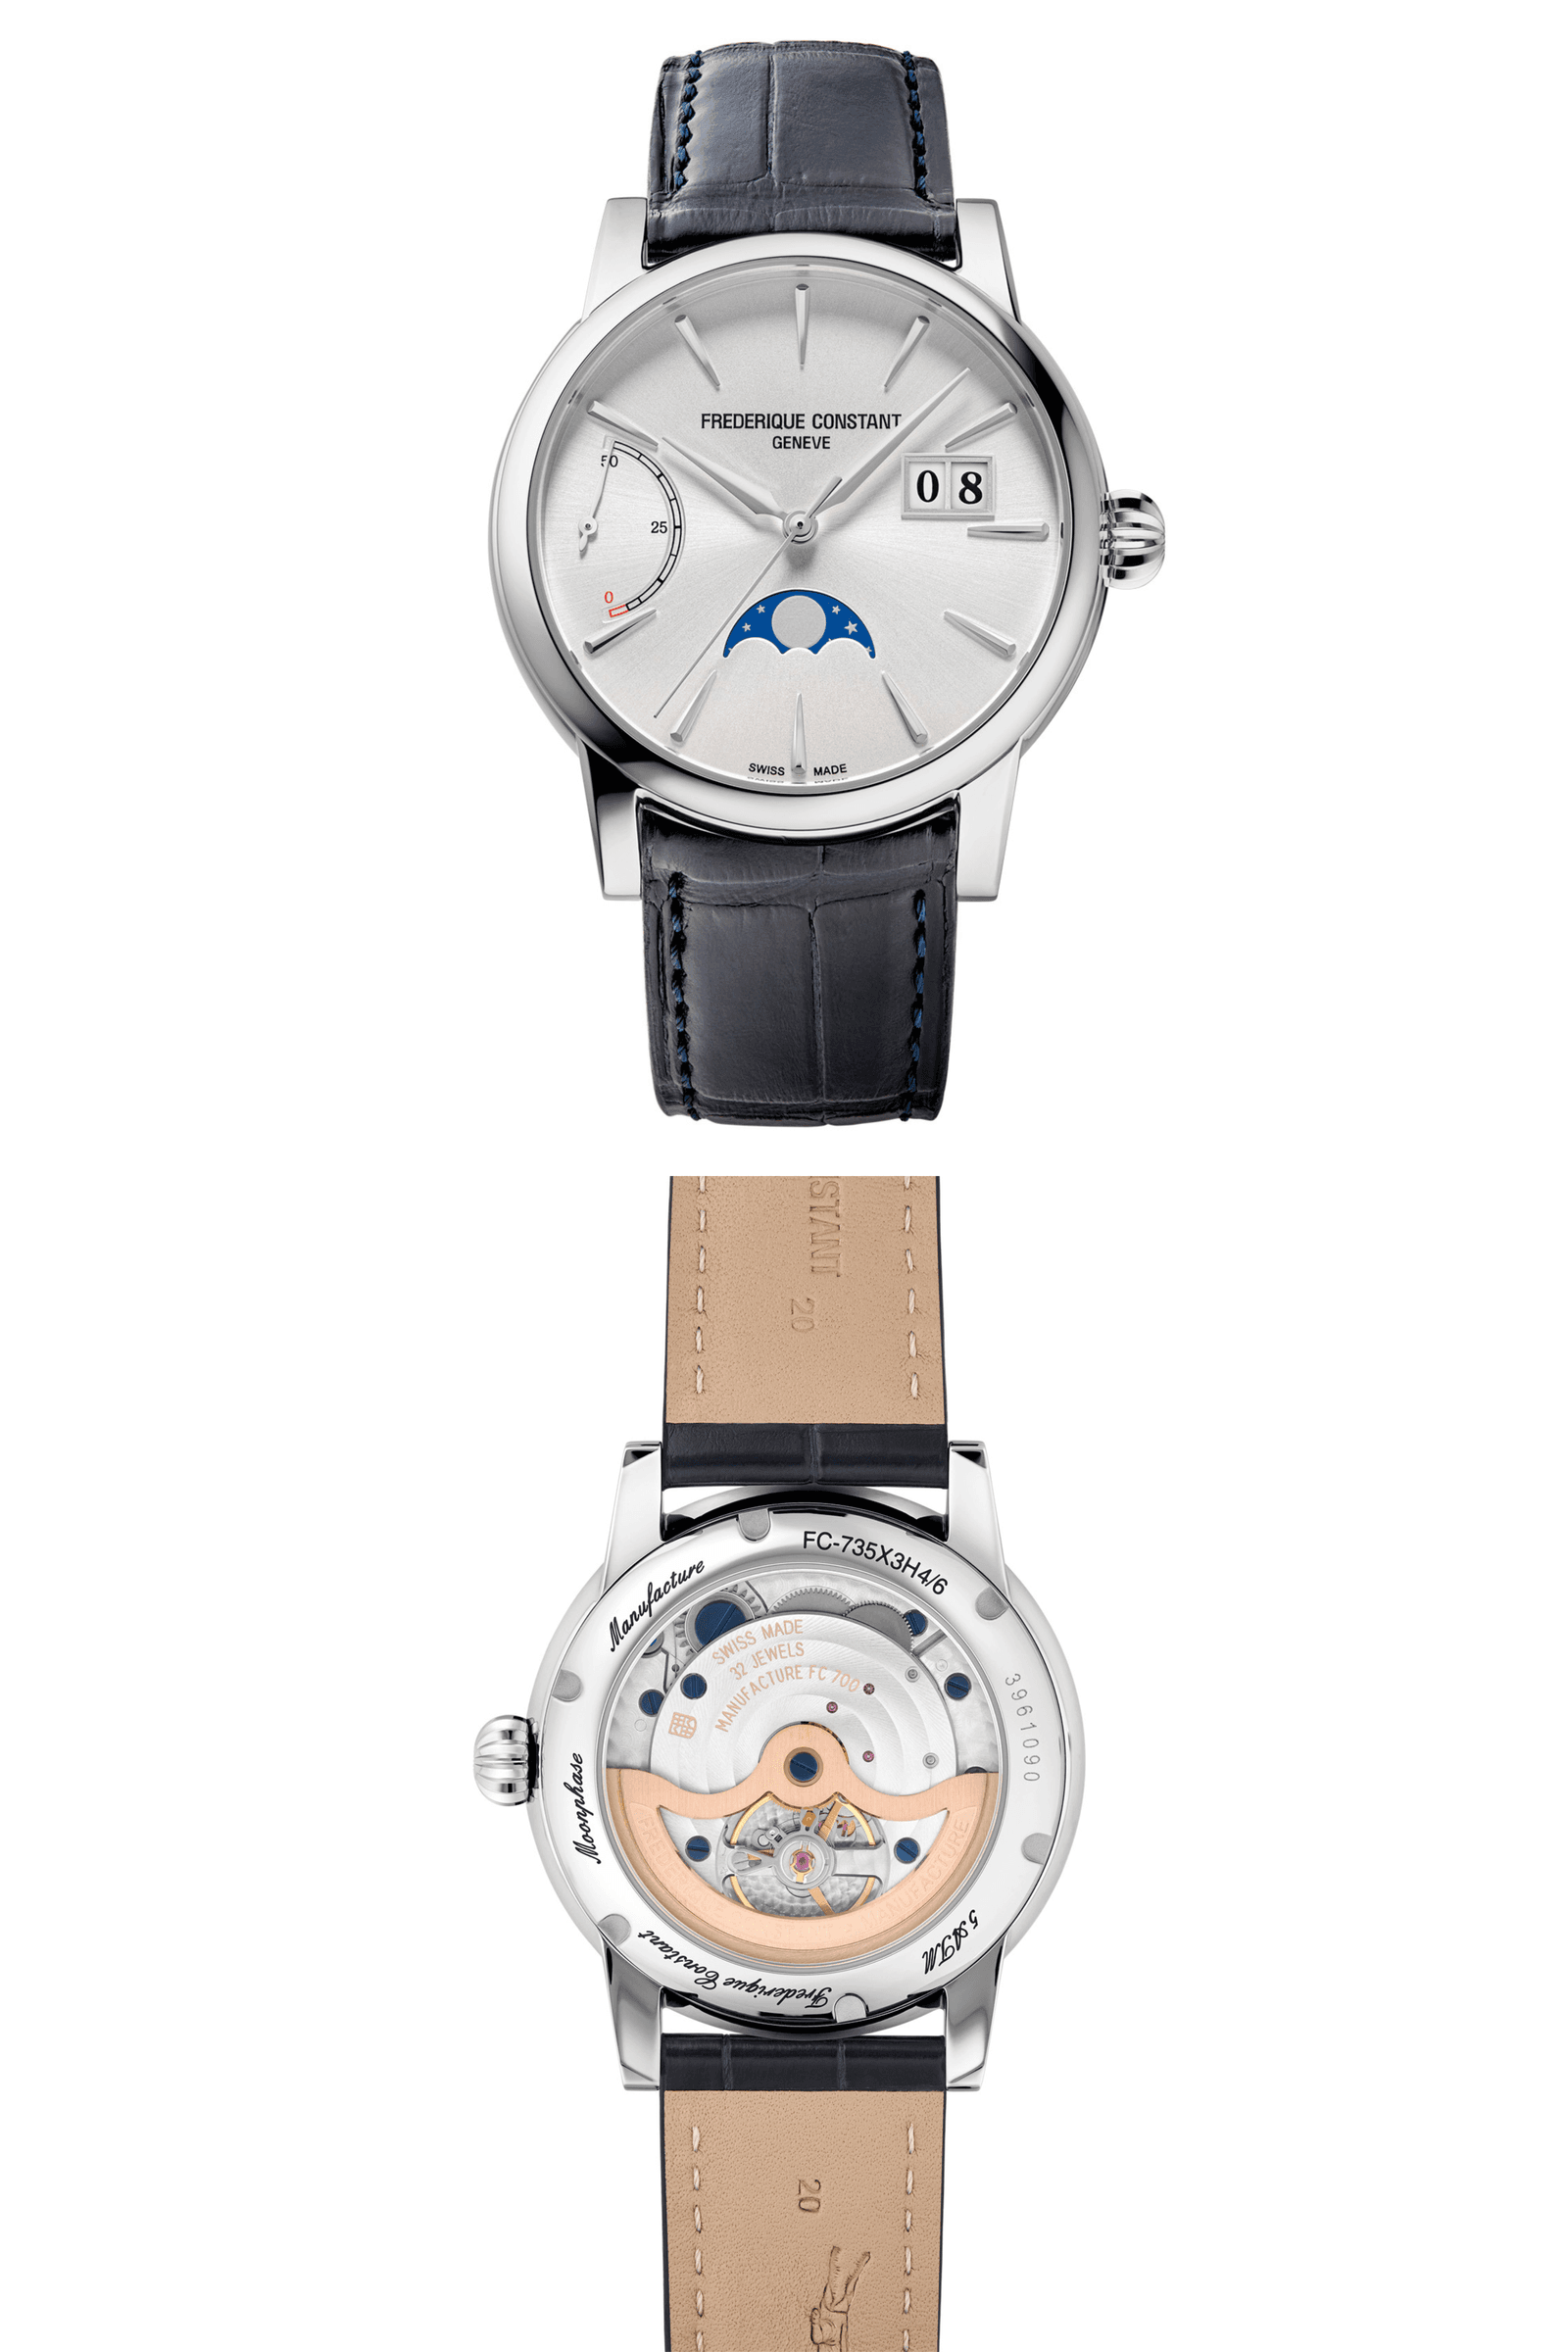 The Frederique Constant Classic Power Reserve Big Date Manufacture watches are powered the FC-735 - the first calibre from the firm to offer a big date, a moon phase and a power reserve indicator.